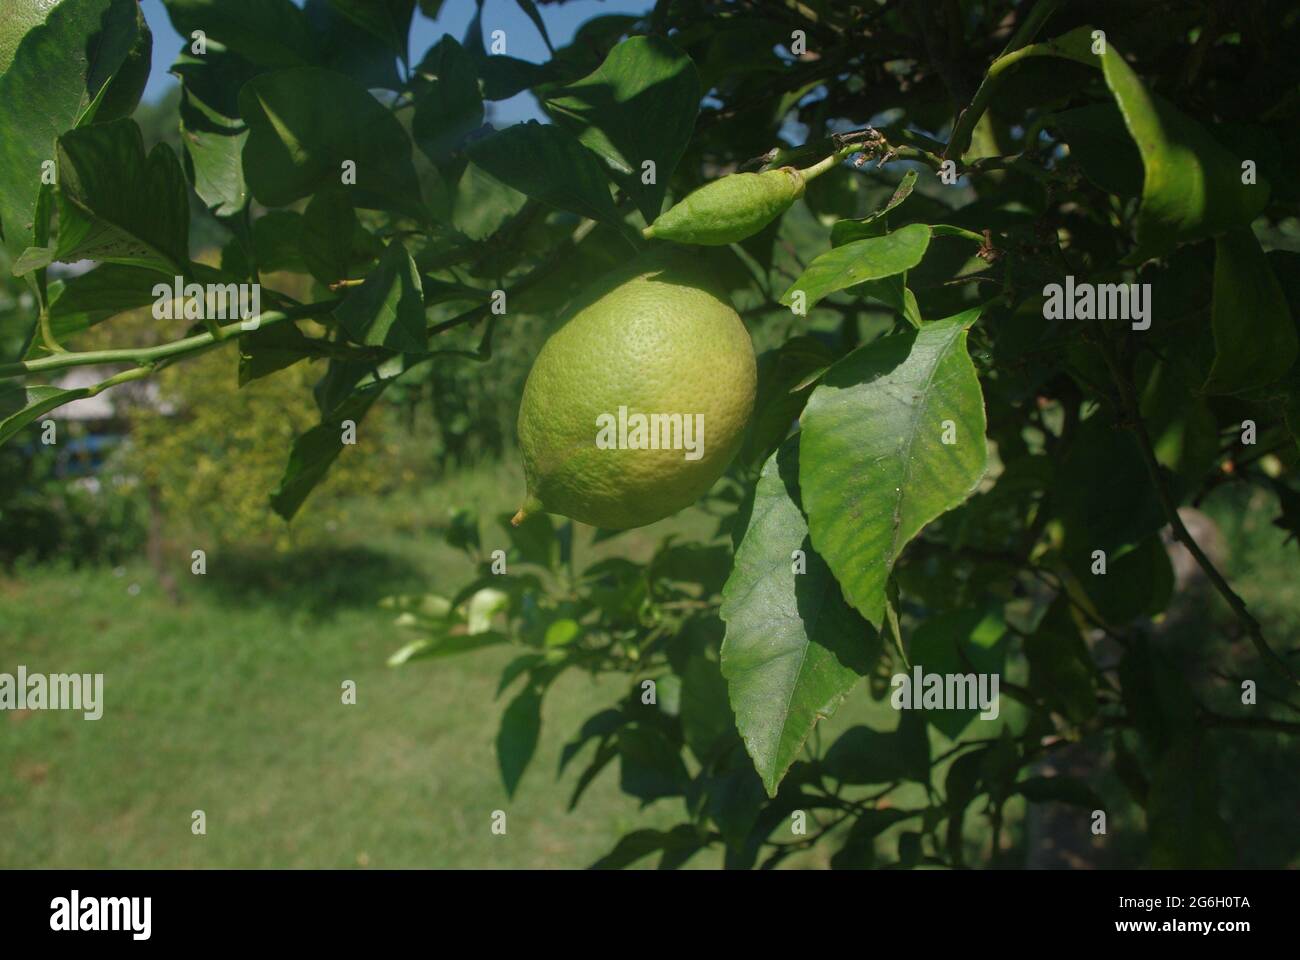 The lemon (Citrus limon) is a species of small evergreen tree in the flowering plant family Rutaceae Stock Photo